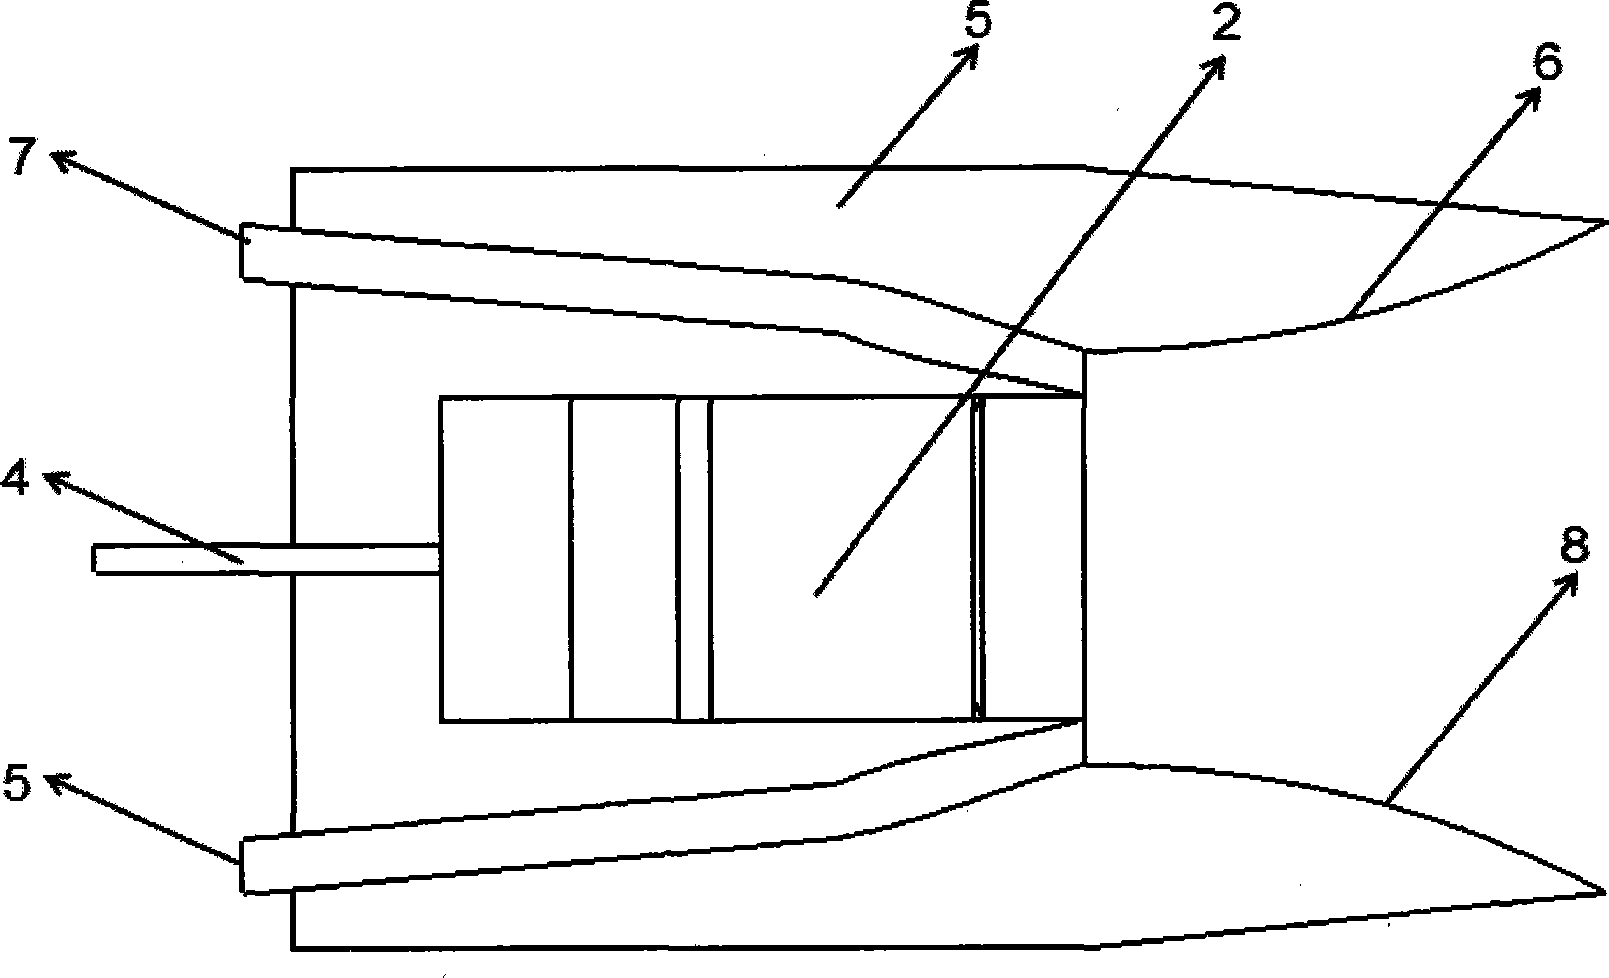 Multi-axial fixed geometrical pneumatic vectoring nozzle structure